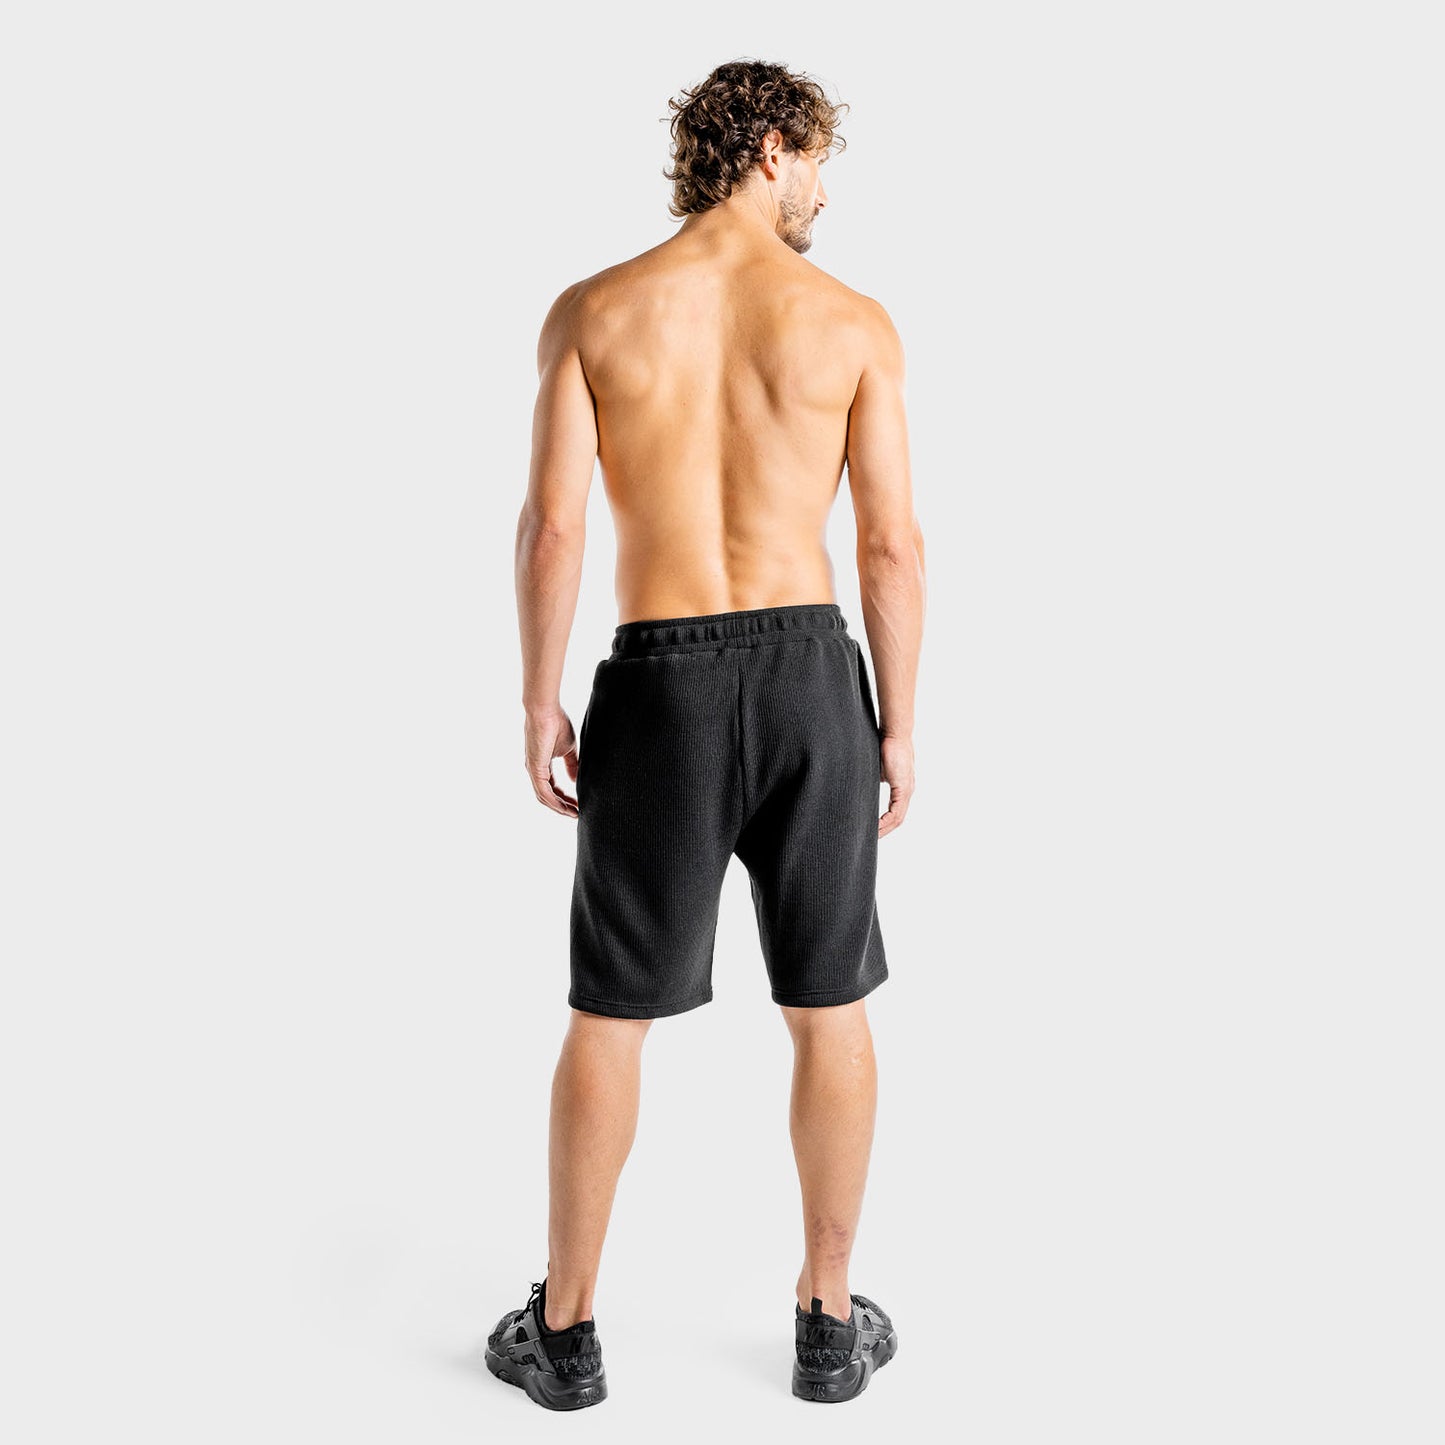 squatwolf-gym-wear-luxe-shorts-black-workout-shorts-for-men